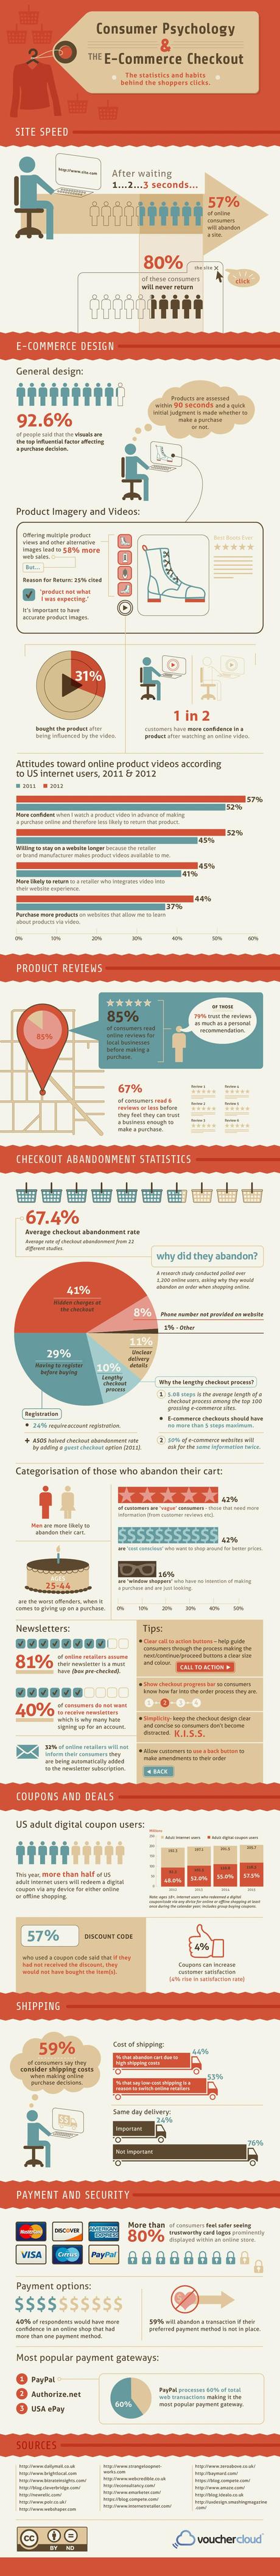 Consumer Psychology and Ecommerce Checkout